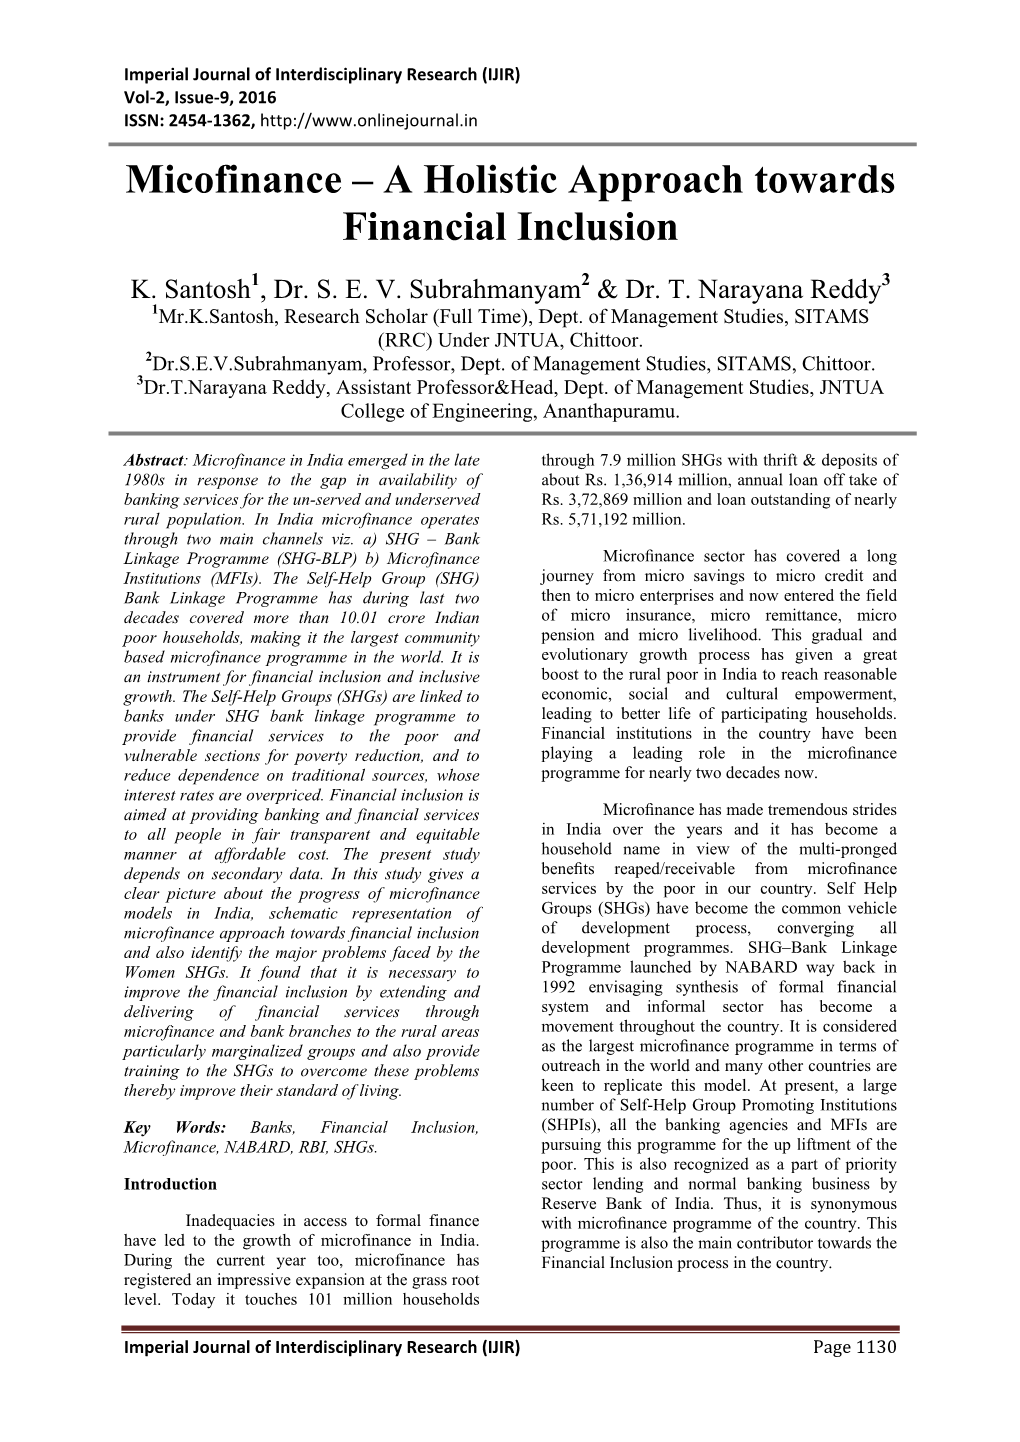 A Holistic Approach Towards Financial Inclusion